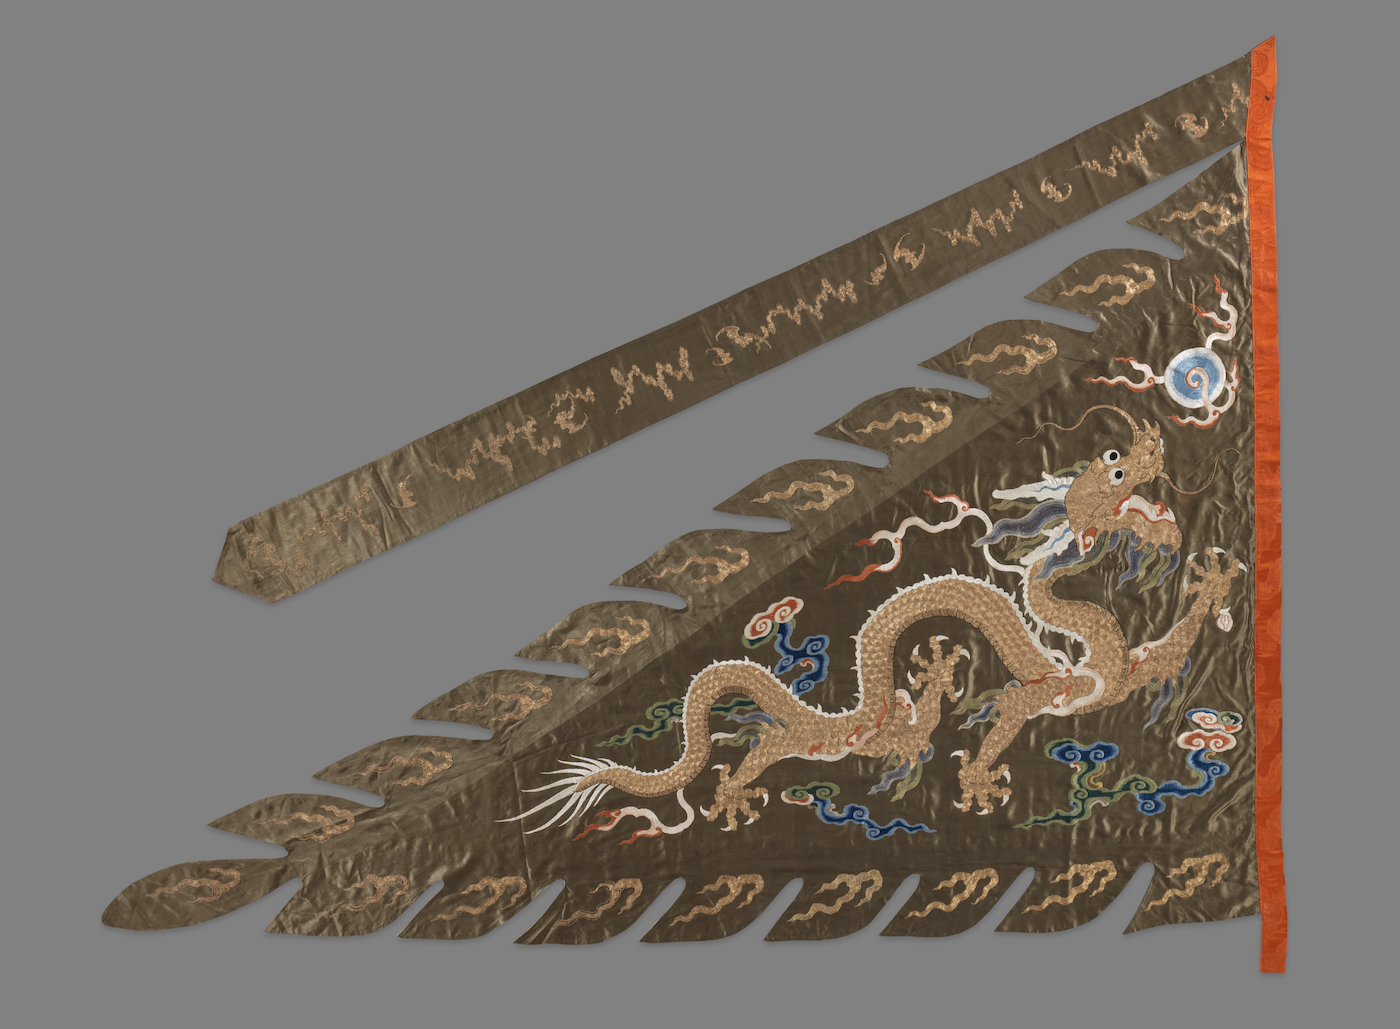 A tan-colored Asian style dragon on a triangular brown flag.